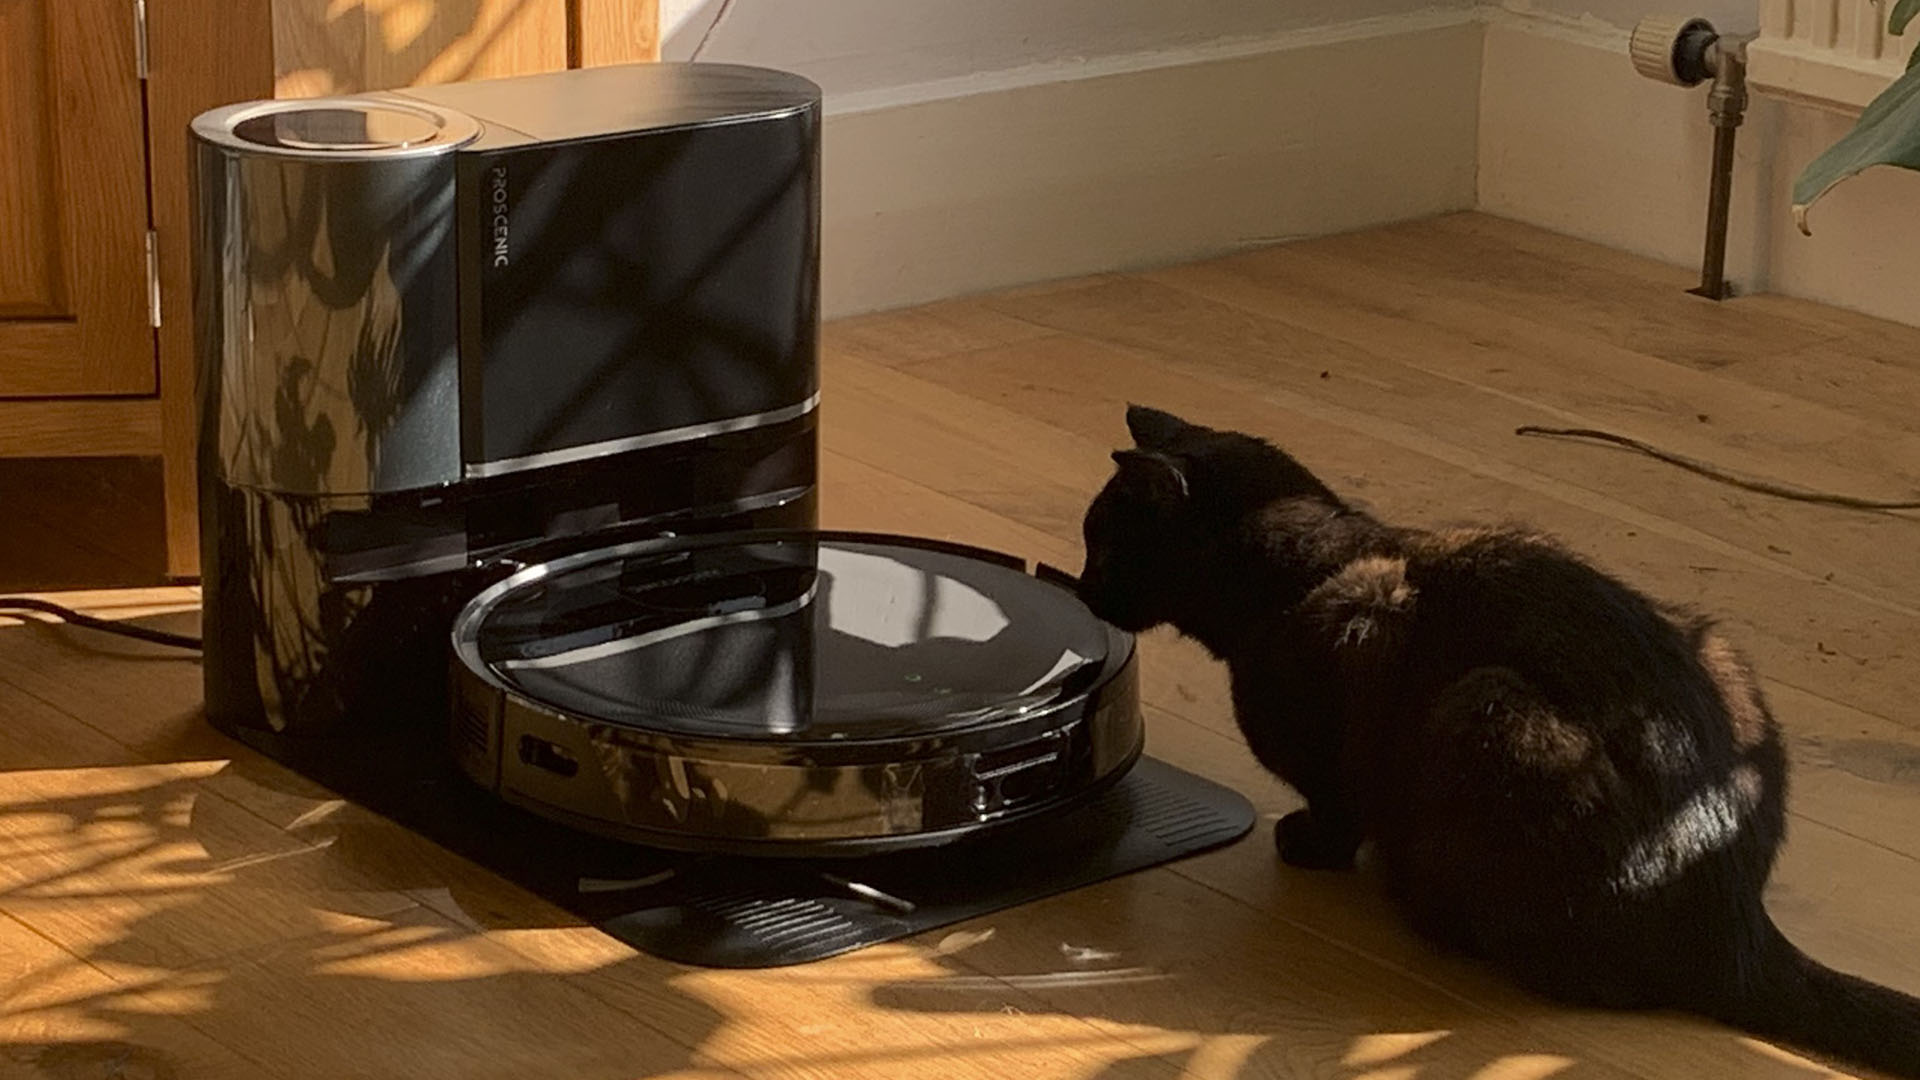 Proscenic Floobot X1 robot vacuum with cat nearby